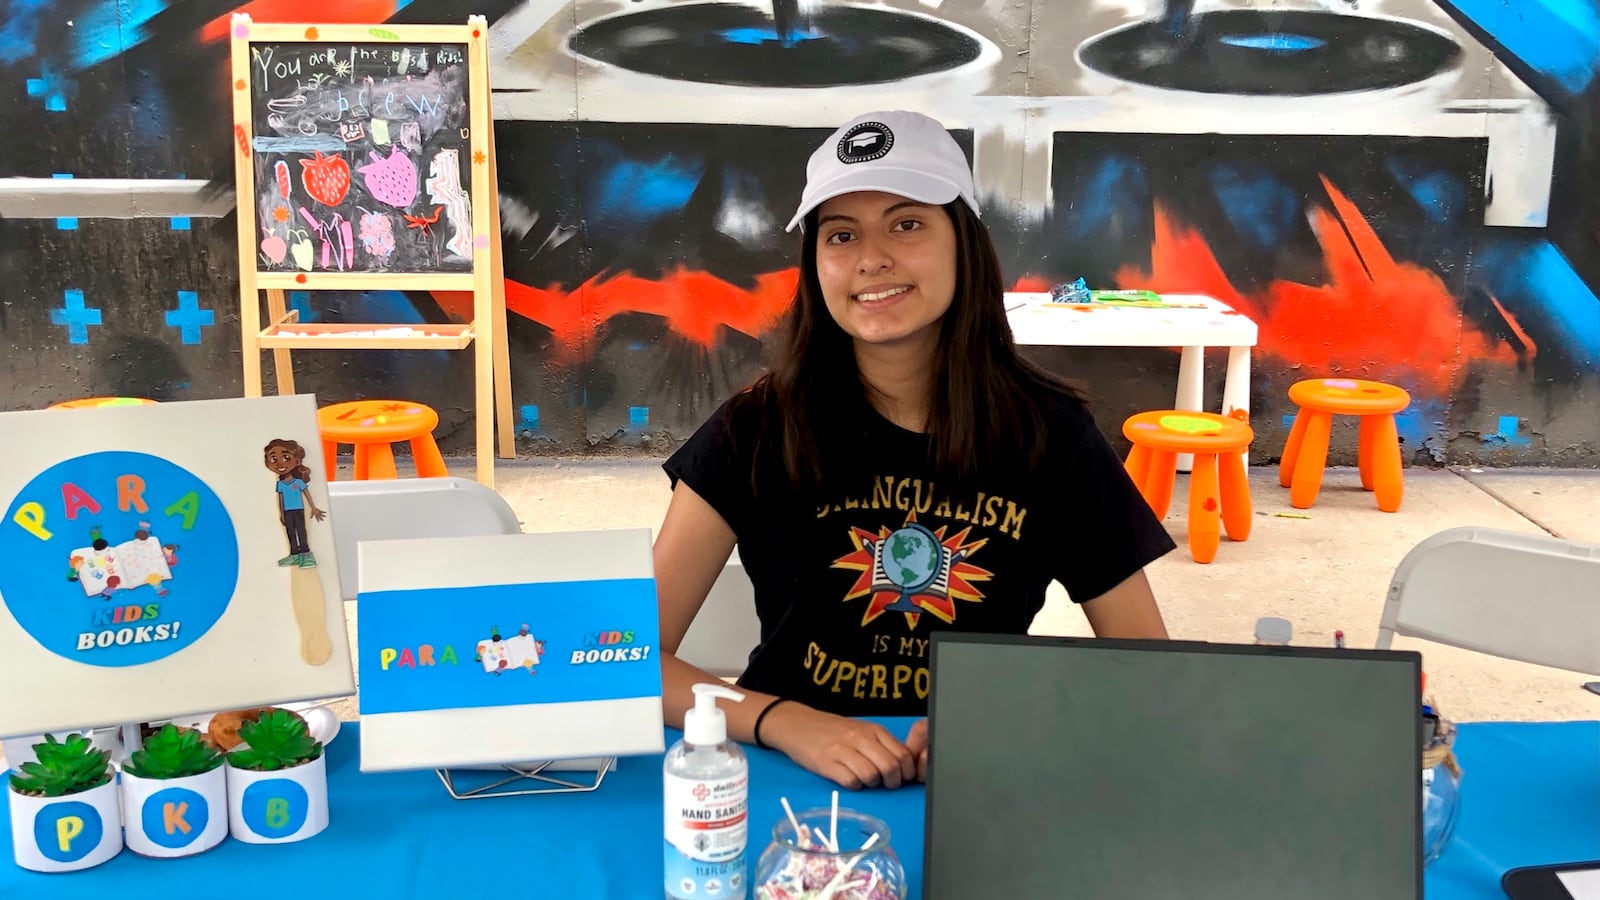 Young woman in a black t-shirt and white cap sits at a table surrounded by promotional materials.